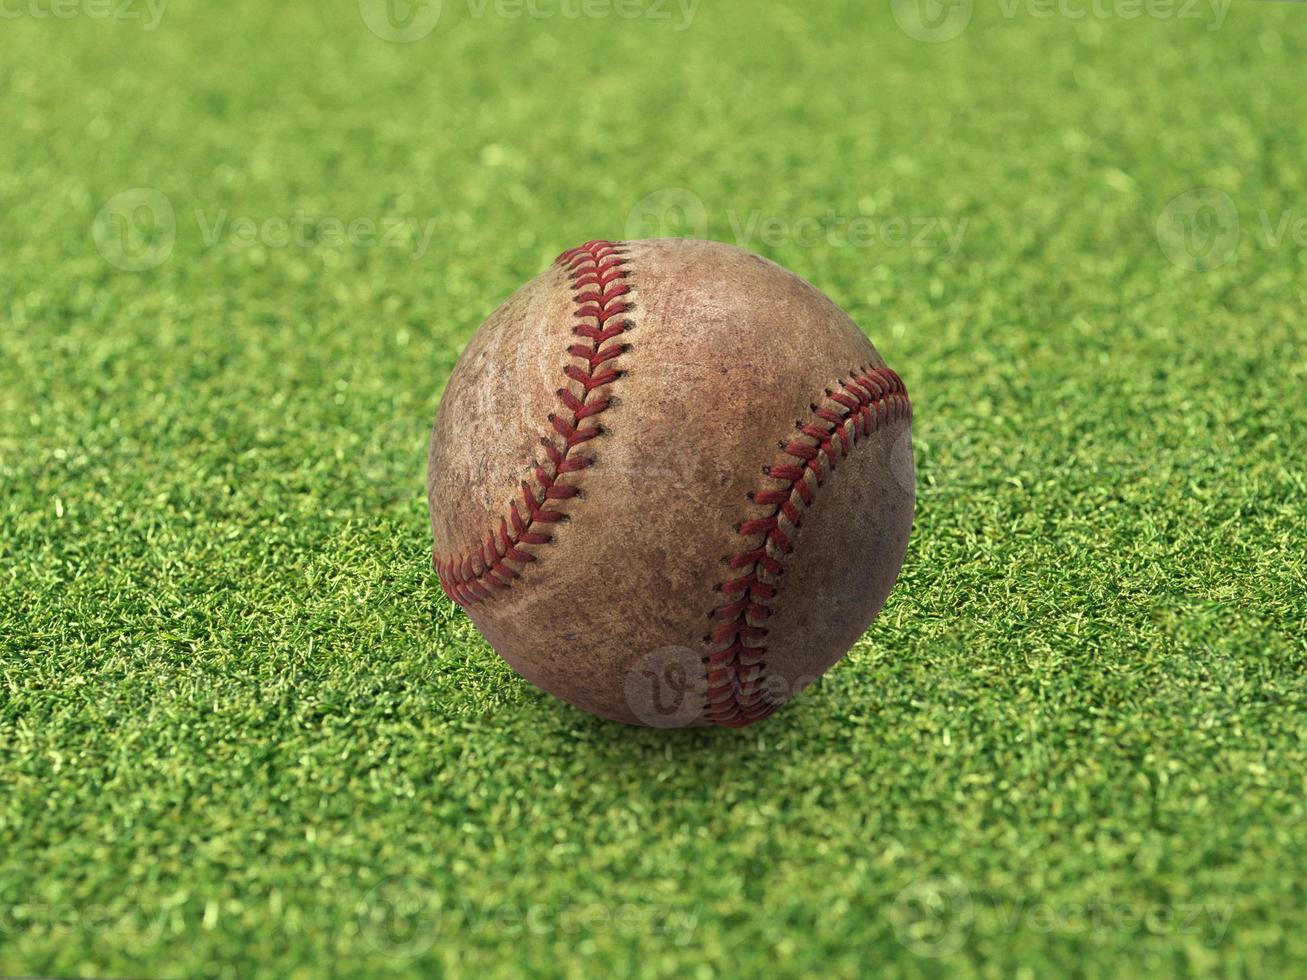 Baseball on the clear green grass turf close-up. Top view photo